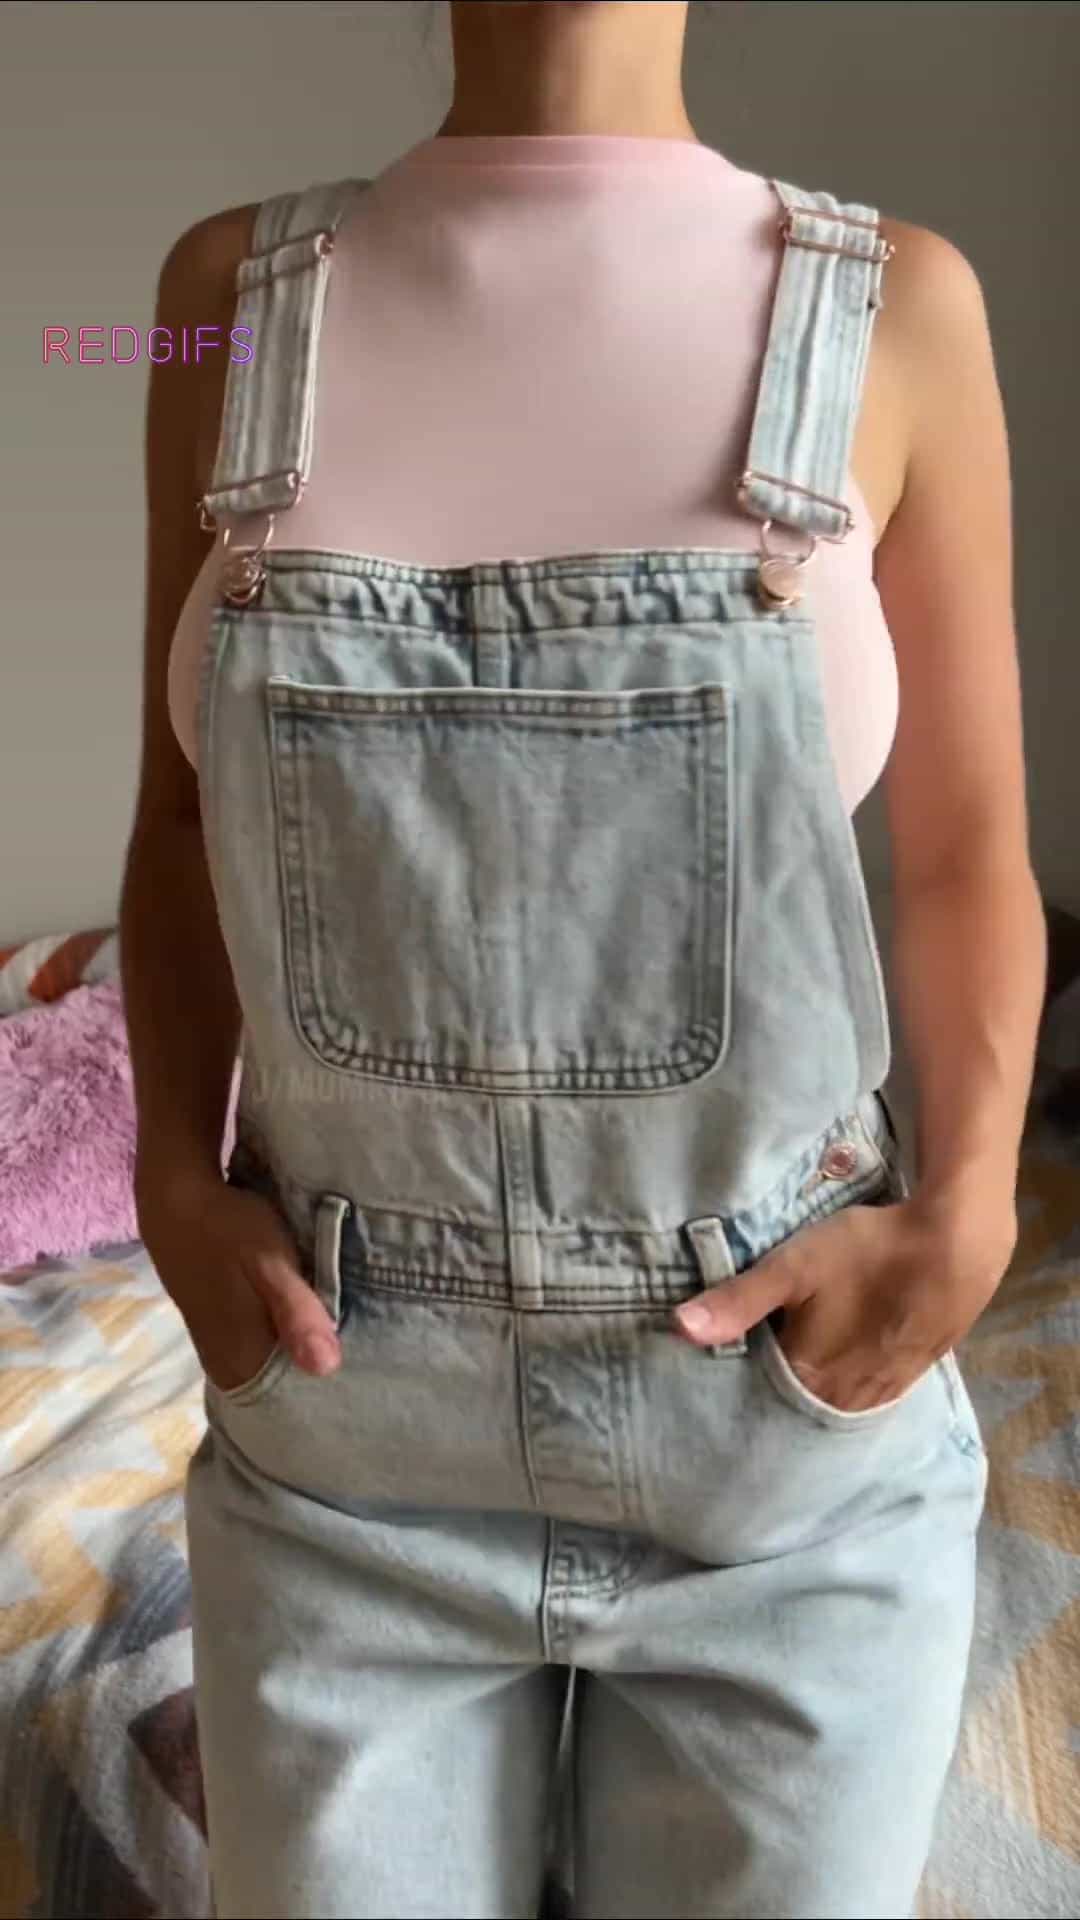 Moms can rock overalls too [reveal]